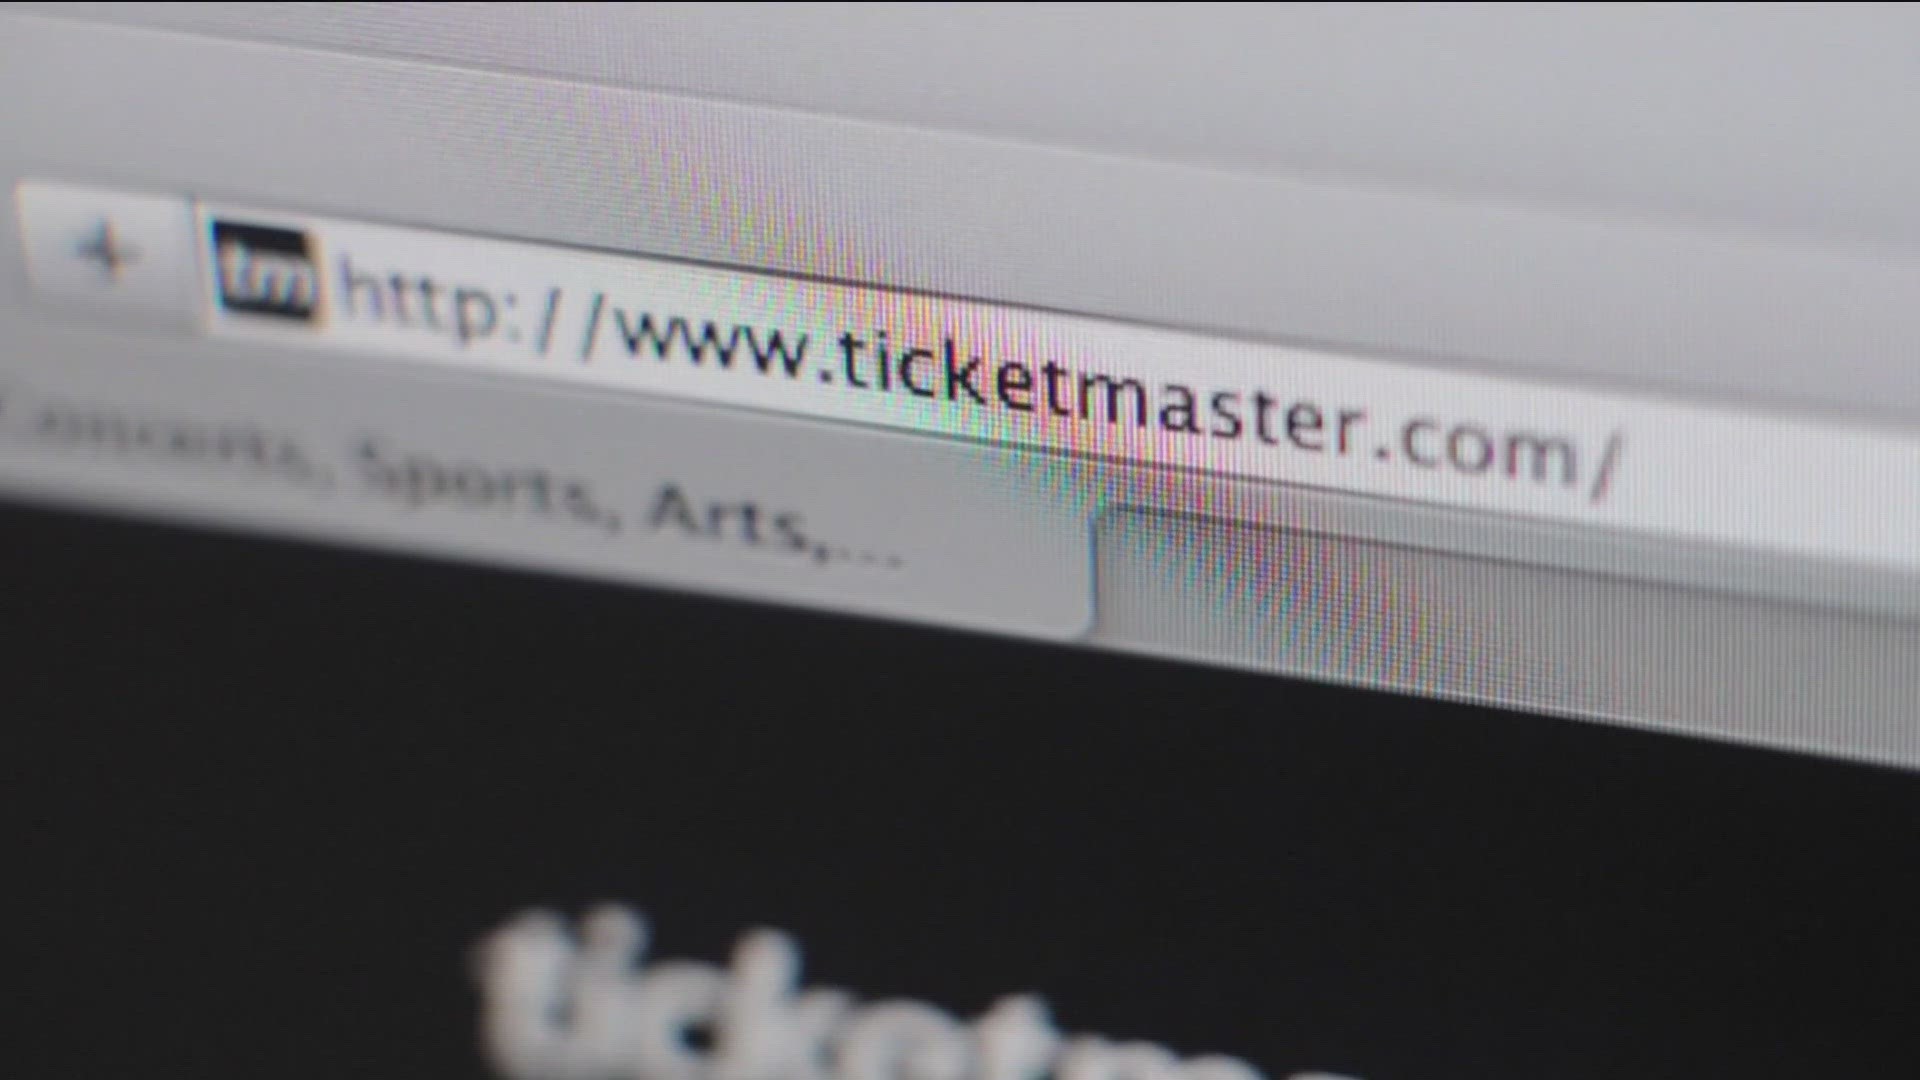 Critics suggest Live Nation can raise ticket prices because of a lack of competition.